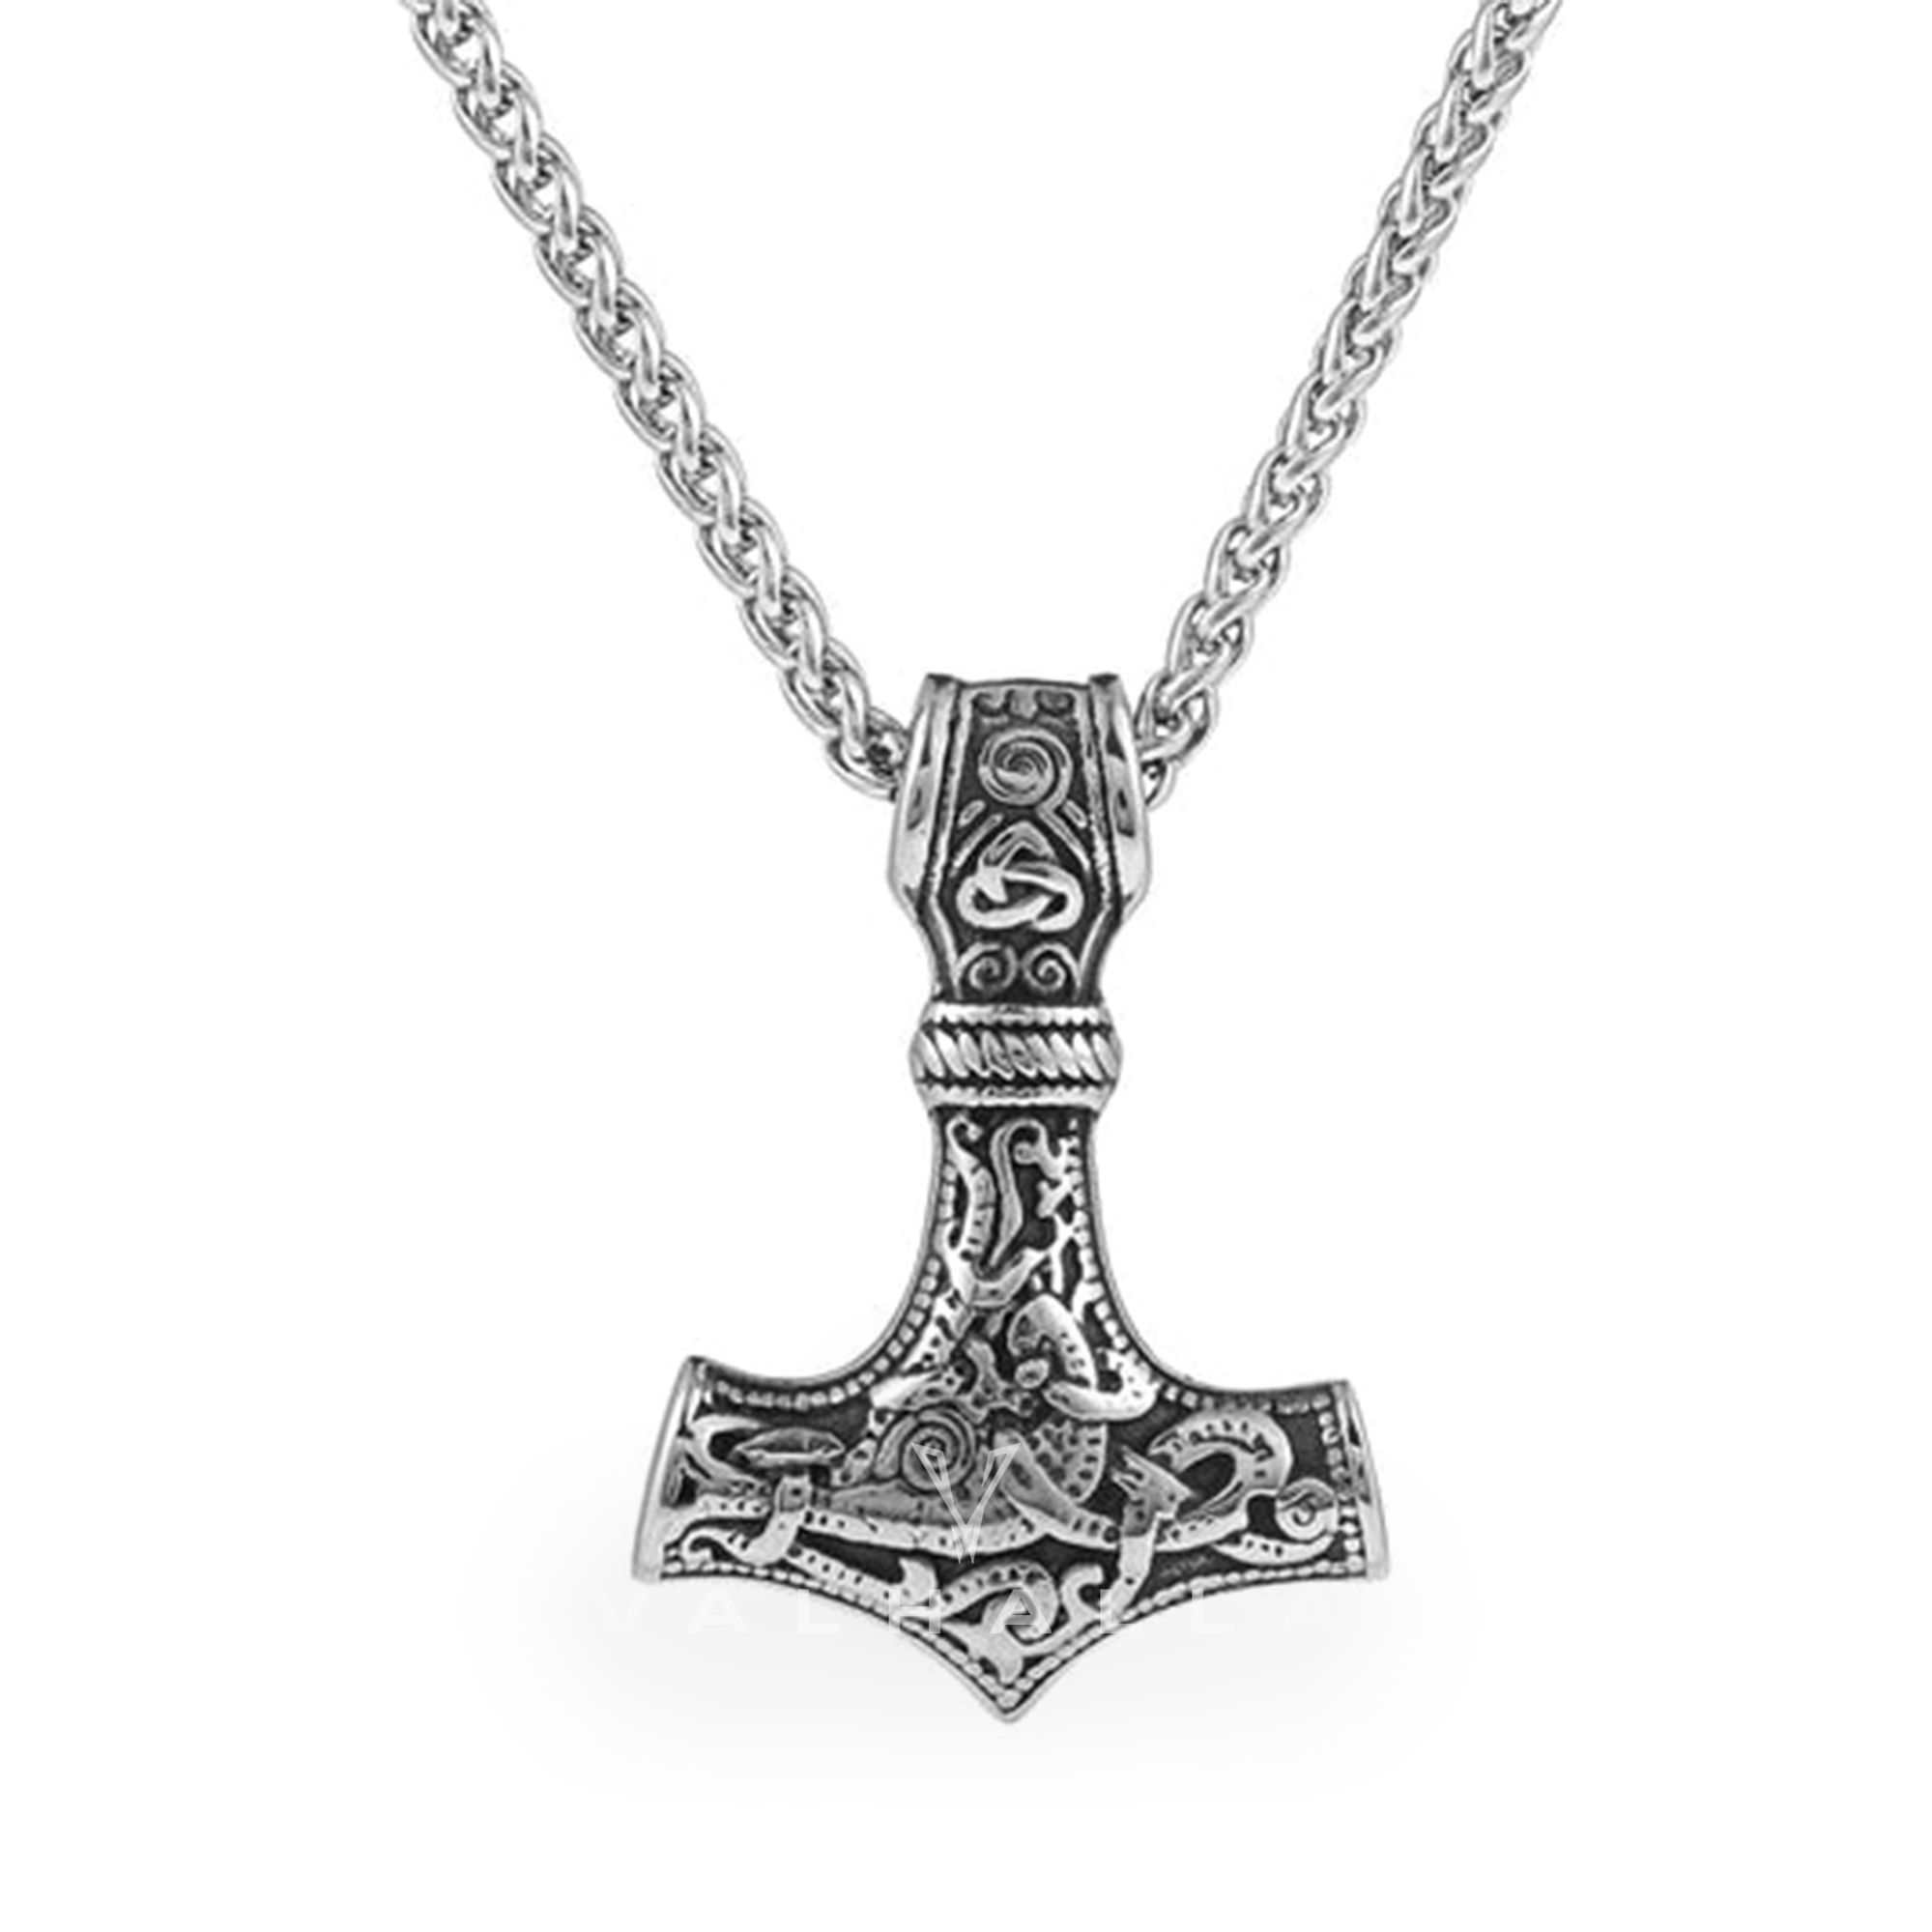 Handcrafted Stainless Steel 'Knotwork' Mjolnir on Handcrafted Stainless Steel Link Chain